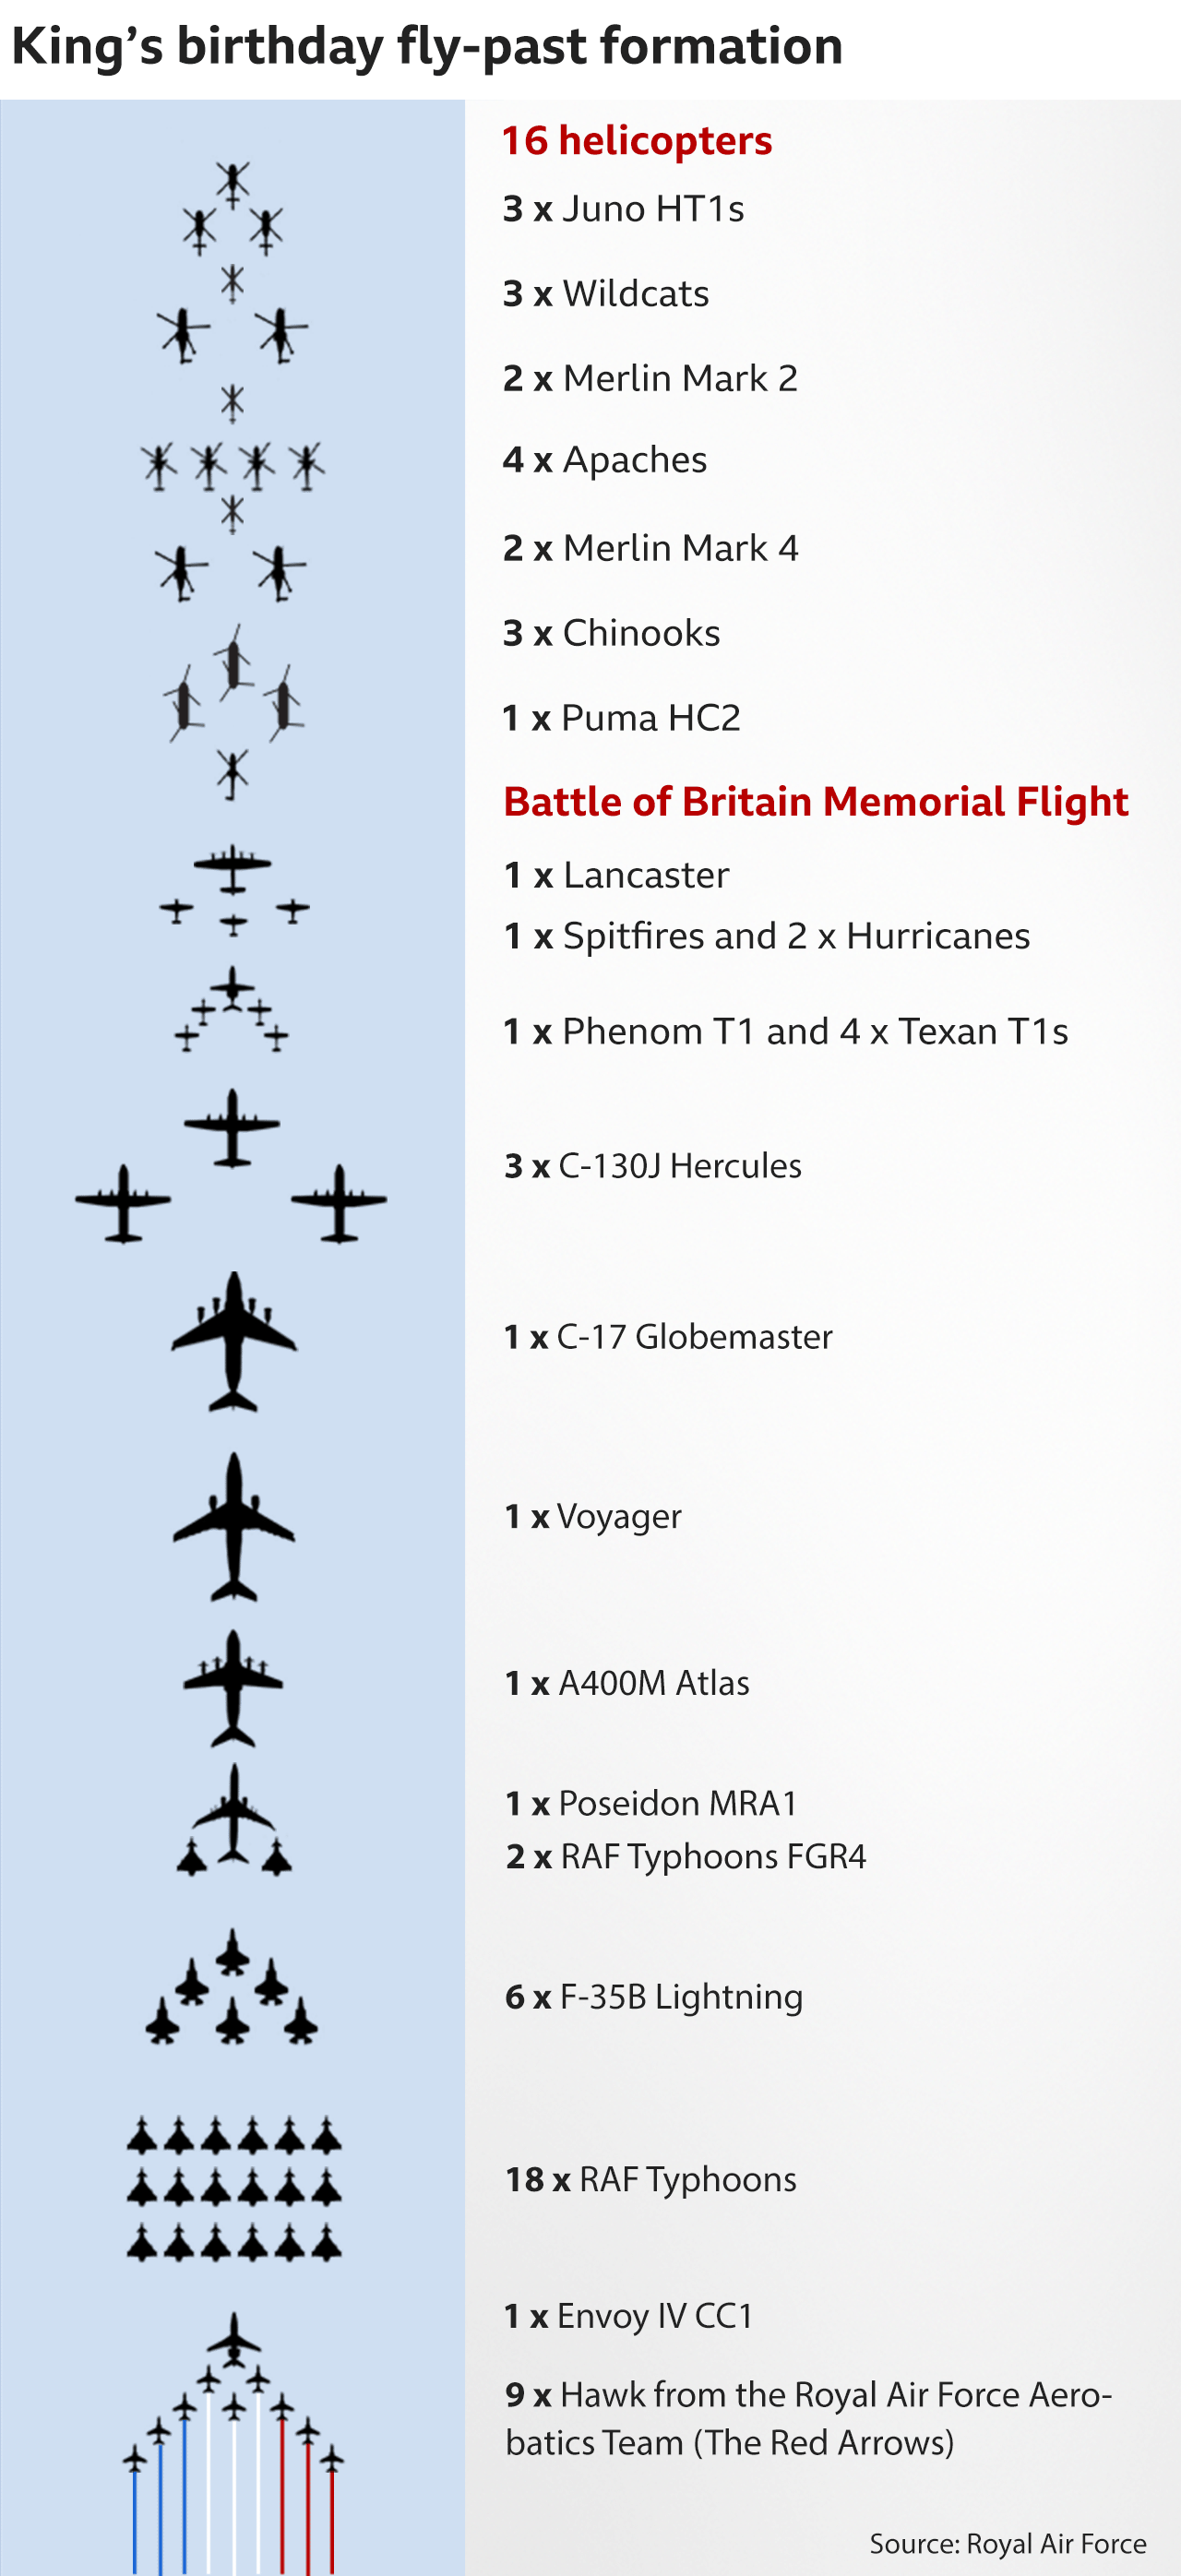 List of aircraft making up the military flypast